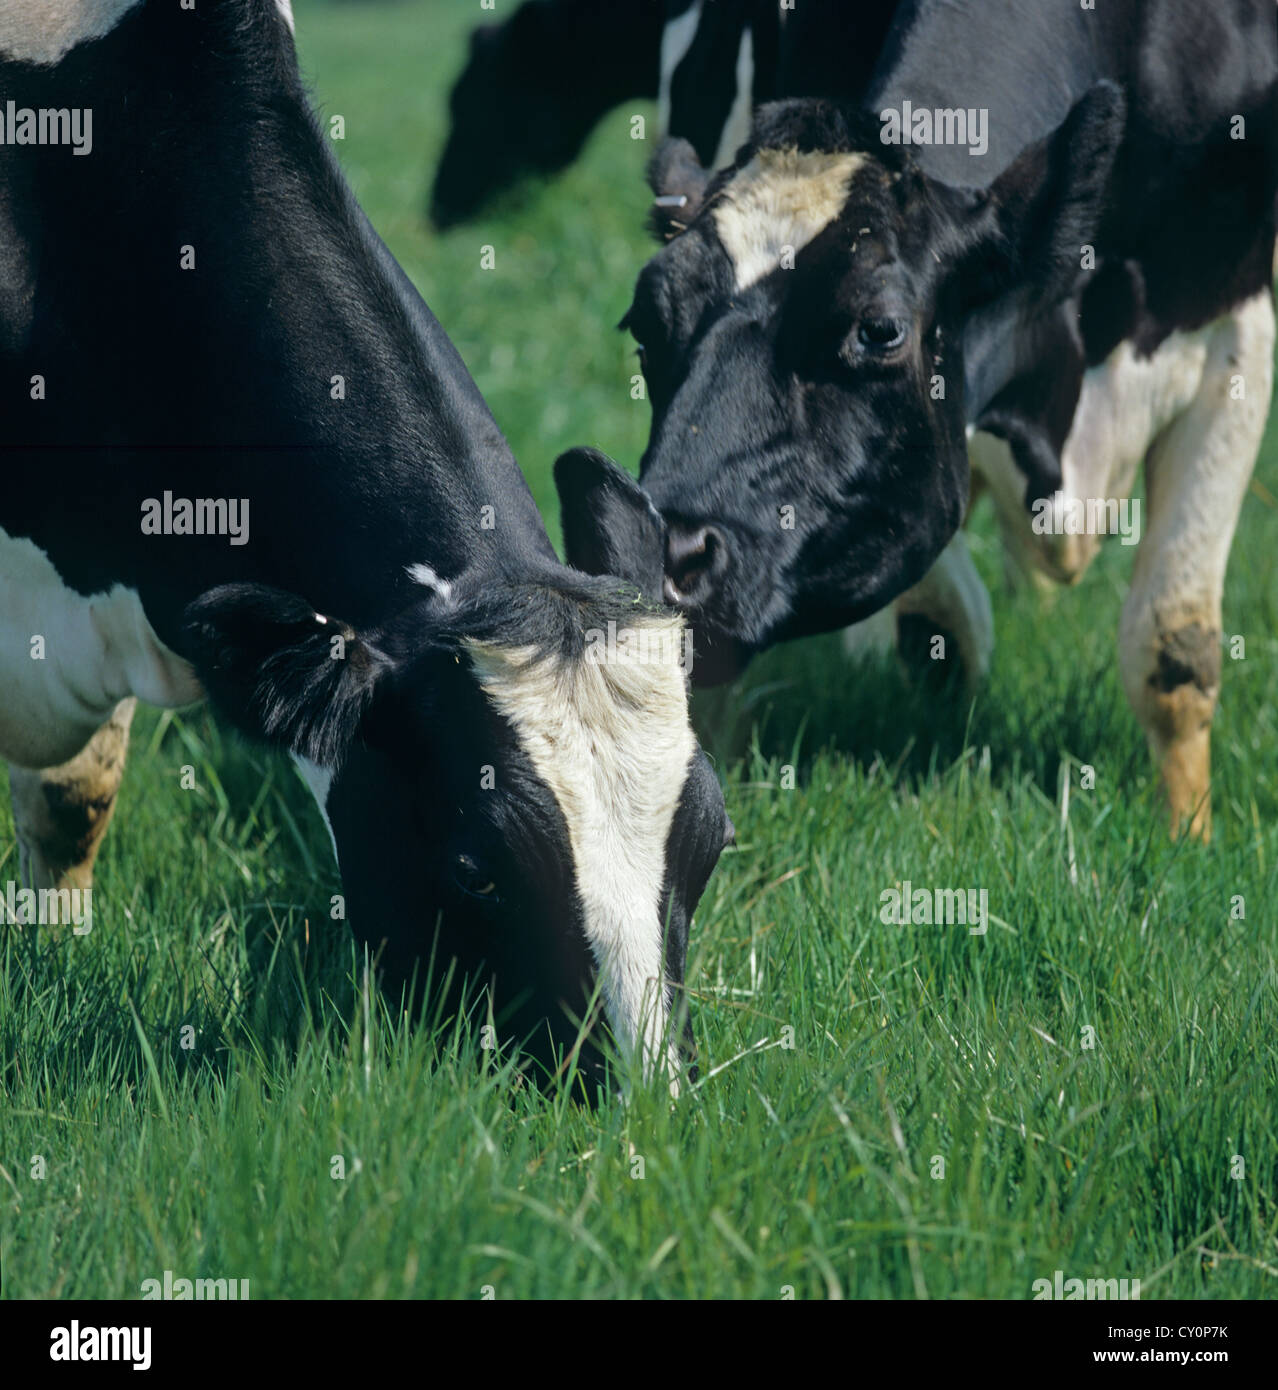 Friesian dairy cow grazing on spring grass Stock Photo